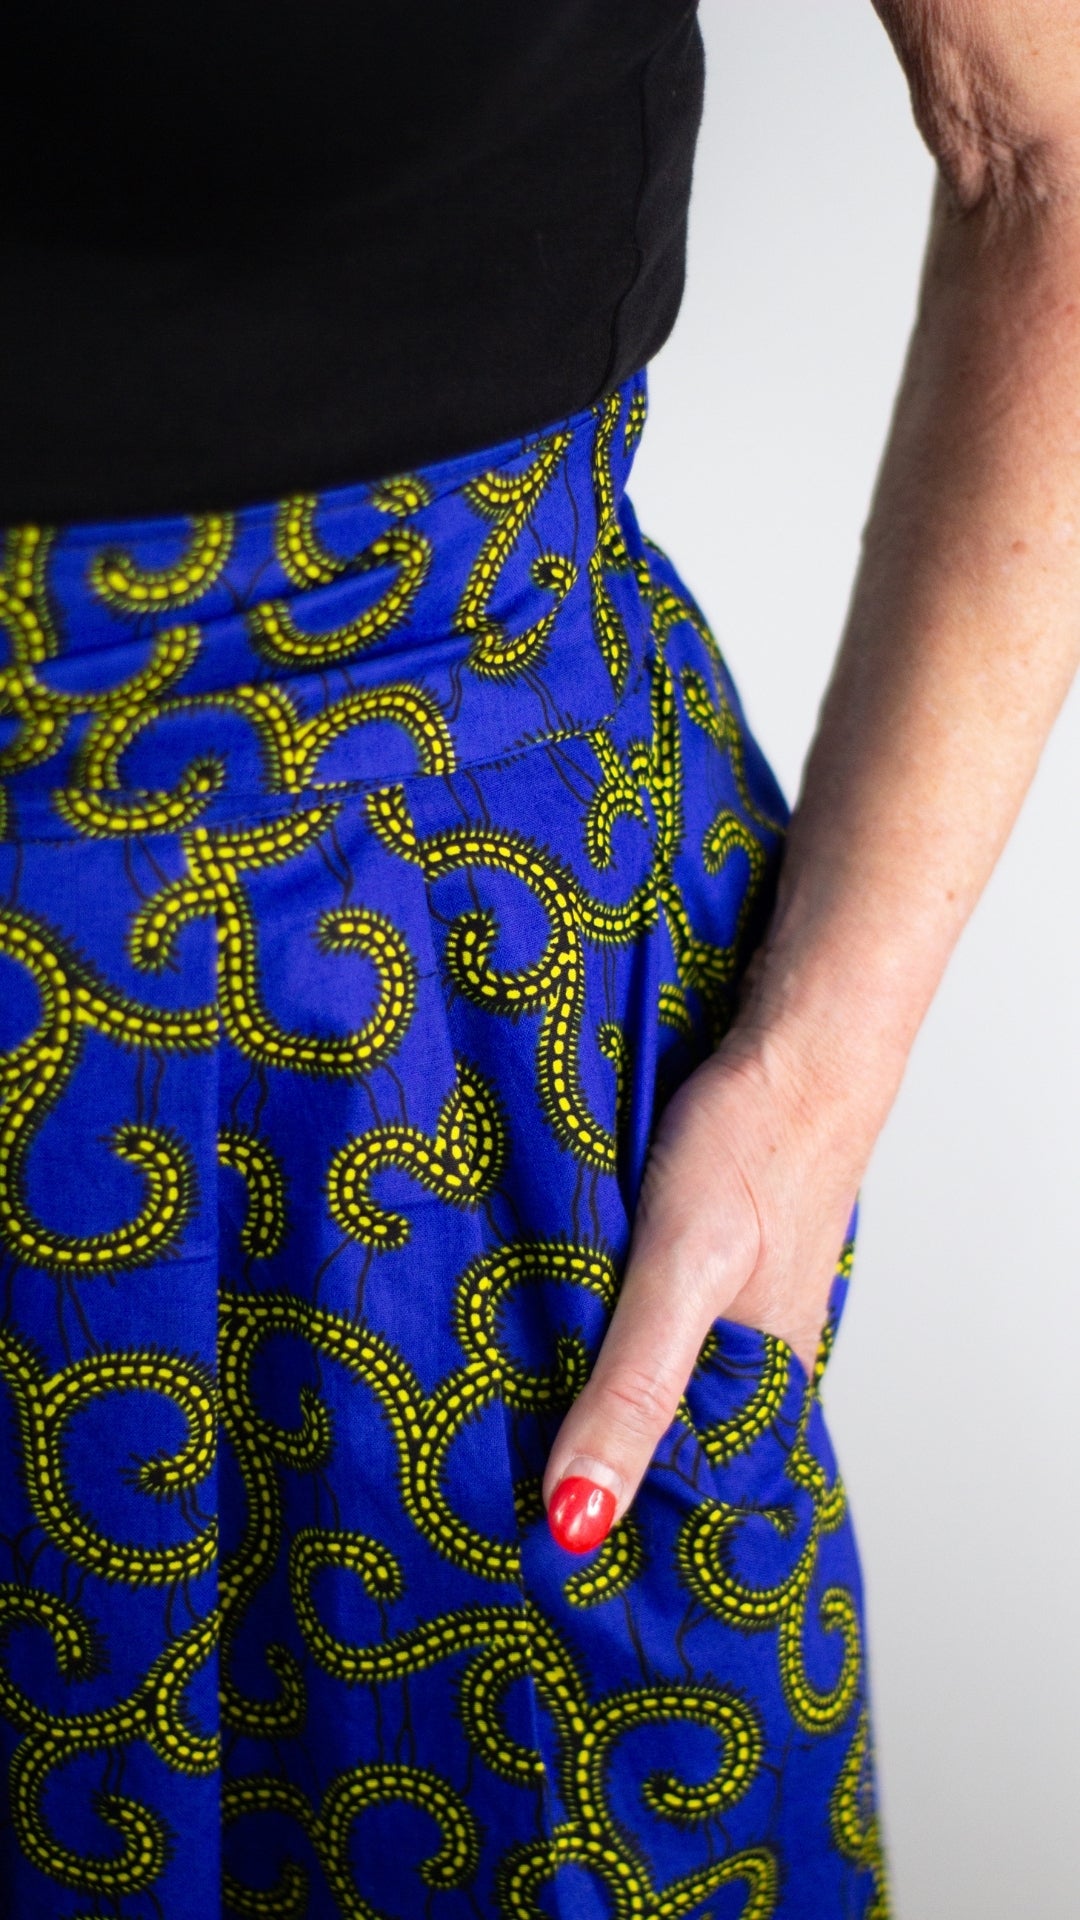 The pocket of a swirly blue print skirt with golden elements.